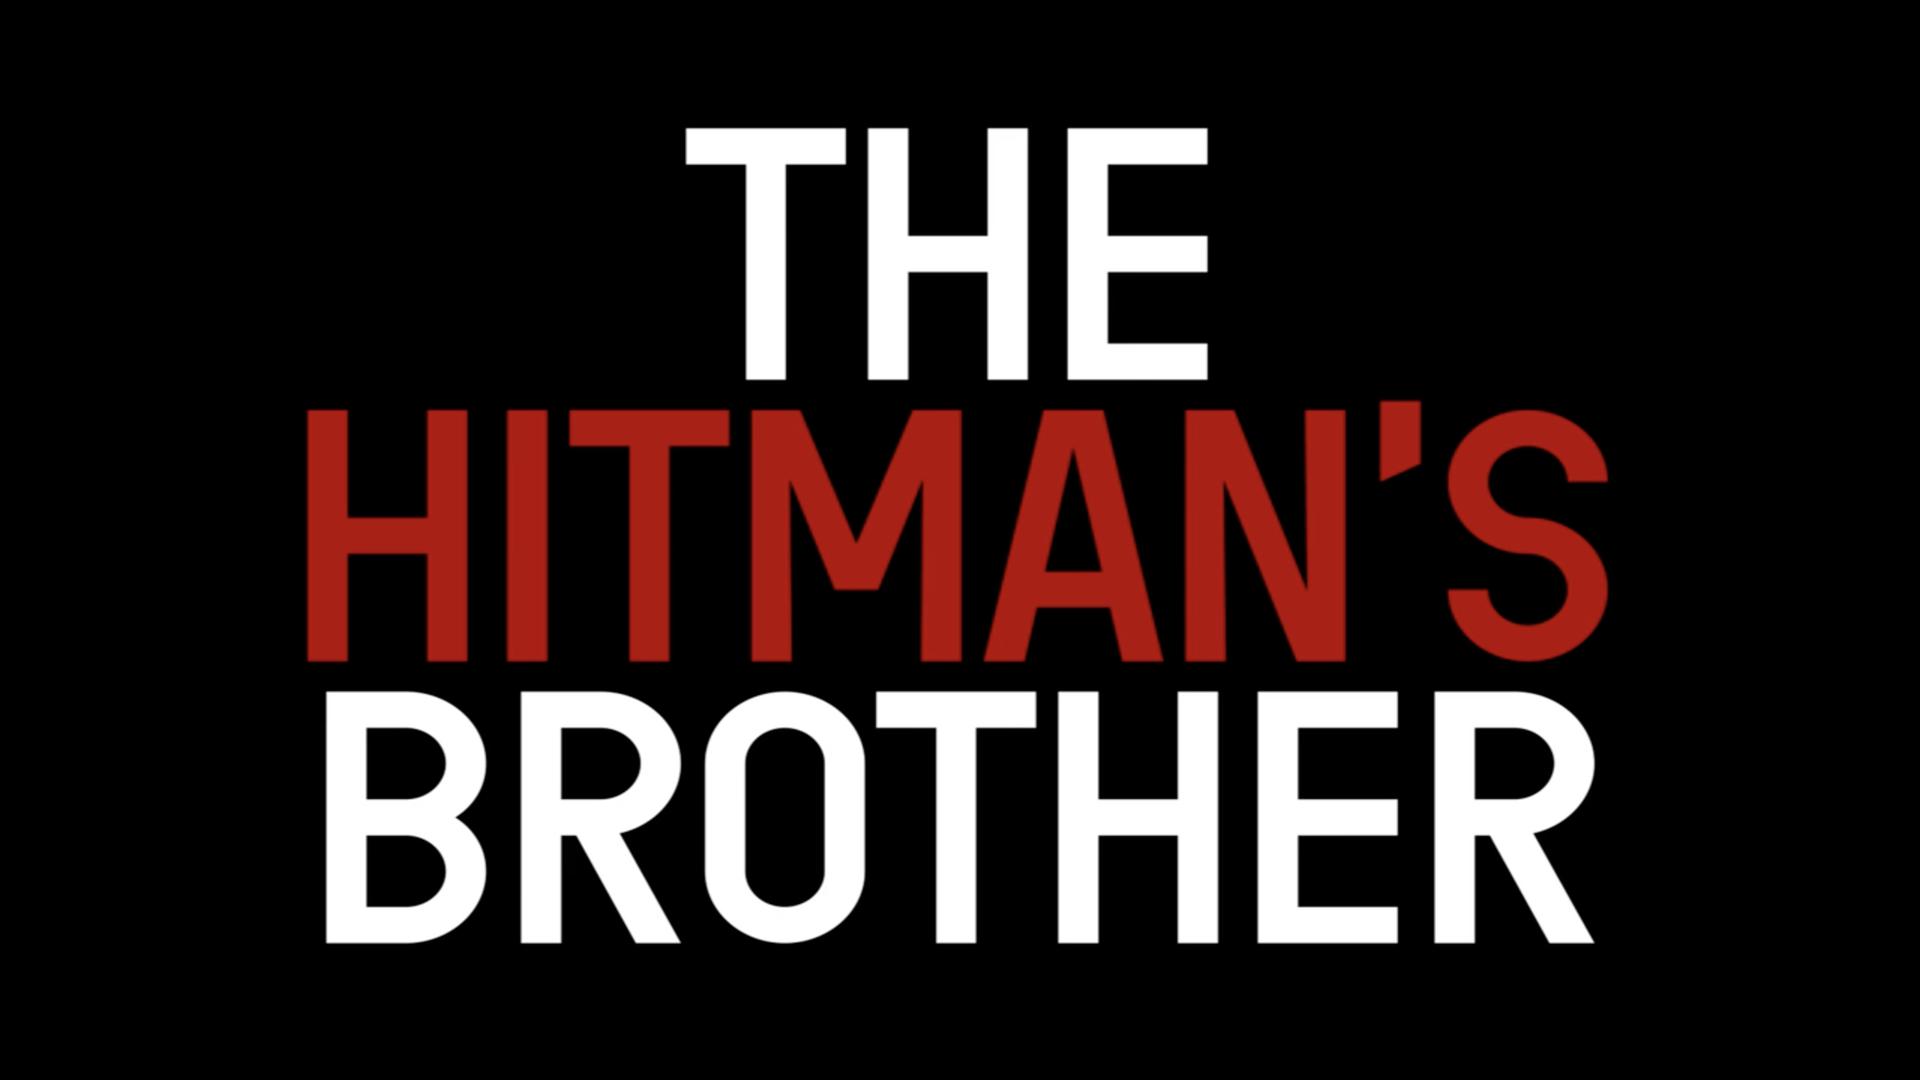 The Hitman's Brother